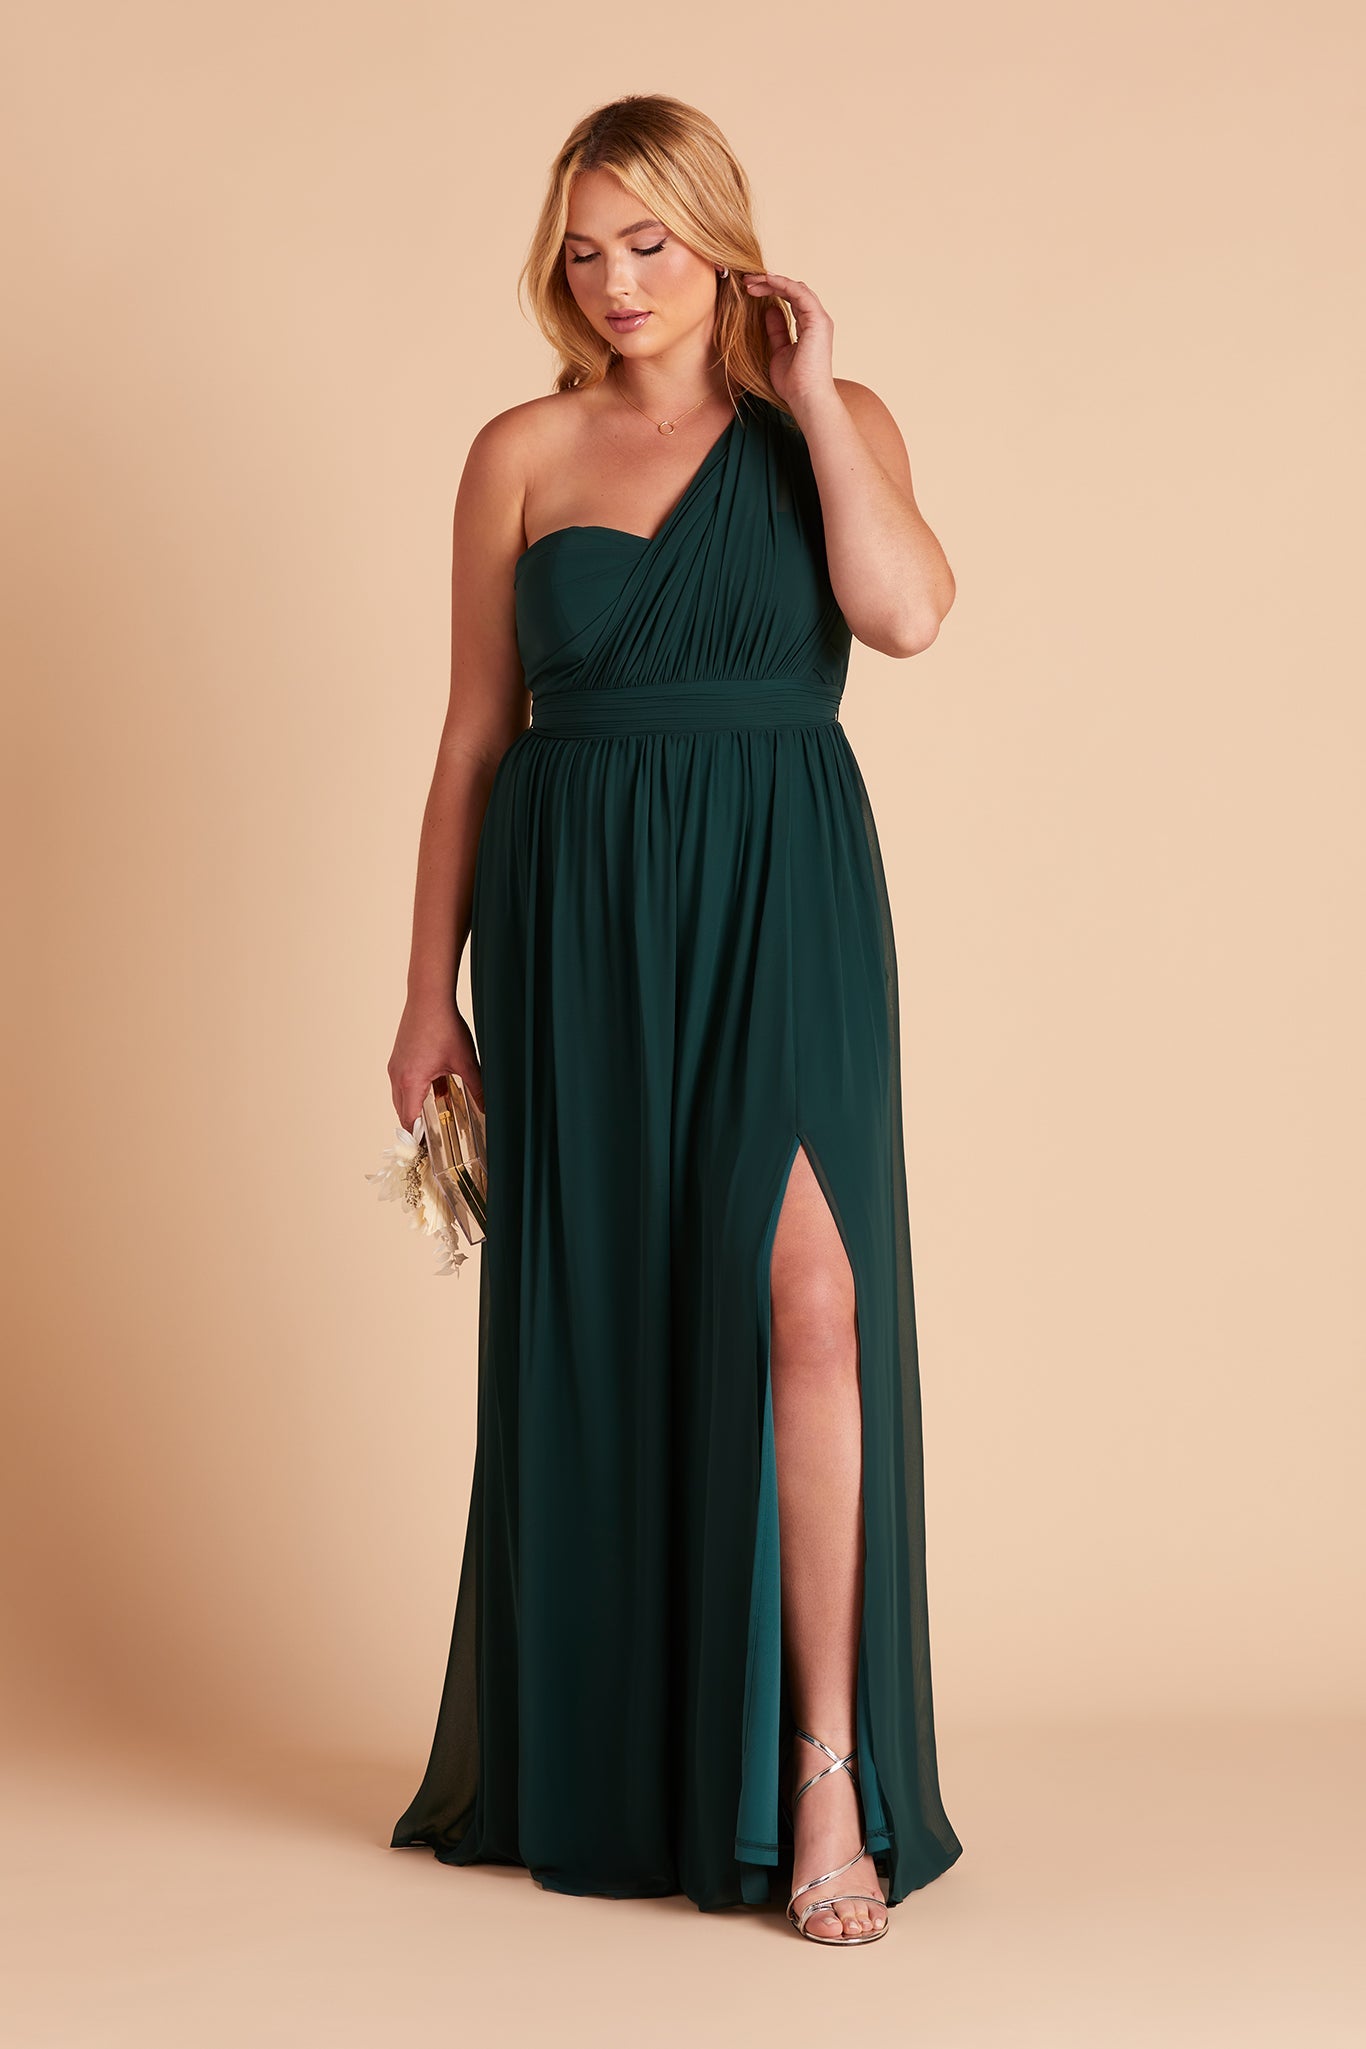 Front view of the floor-length Grace Convertible Plus Size Bridesmaid Dress in emerald chiffon with both streamers pulled over the left shoulder on a curvy model with light skin tone.